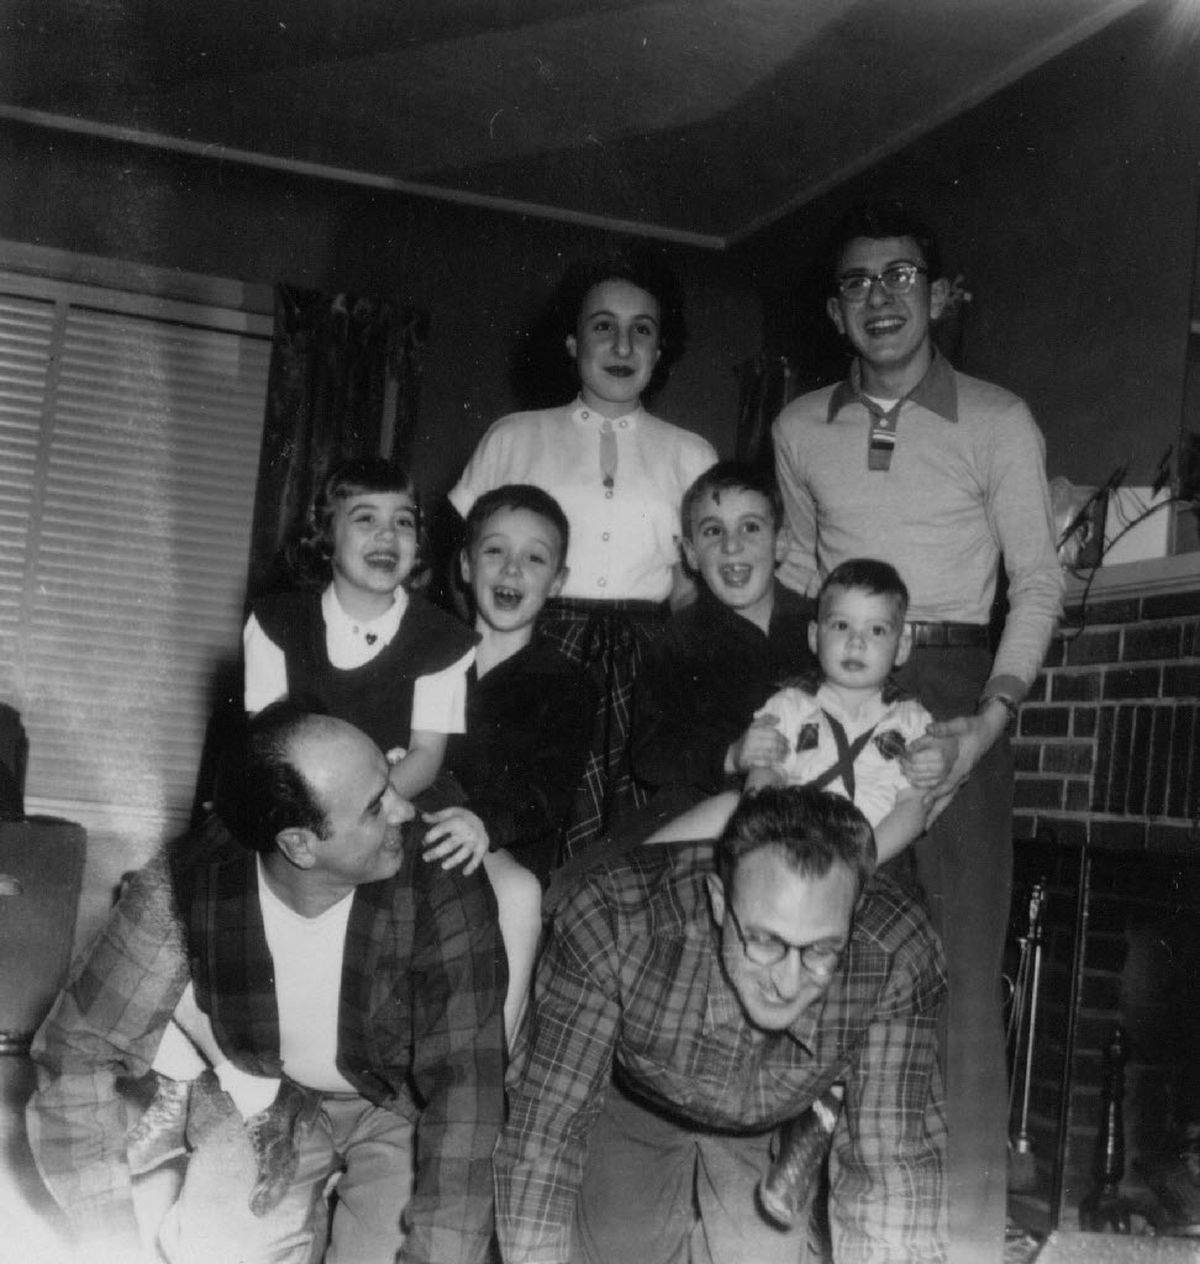 Fruci-Sacco-Perry family members horse around at a 1953 family dinner. The “horses” are Ernie Sacco and Tony Perry. The little kids, from left, are Christine Sacco, Paul Fruci, Bob Perry and Mike Sacco. In back, Janet Perry and Rich Perry. 